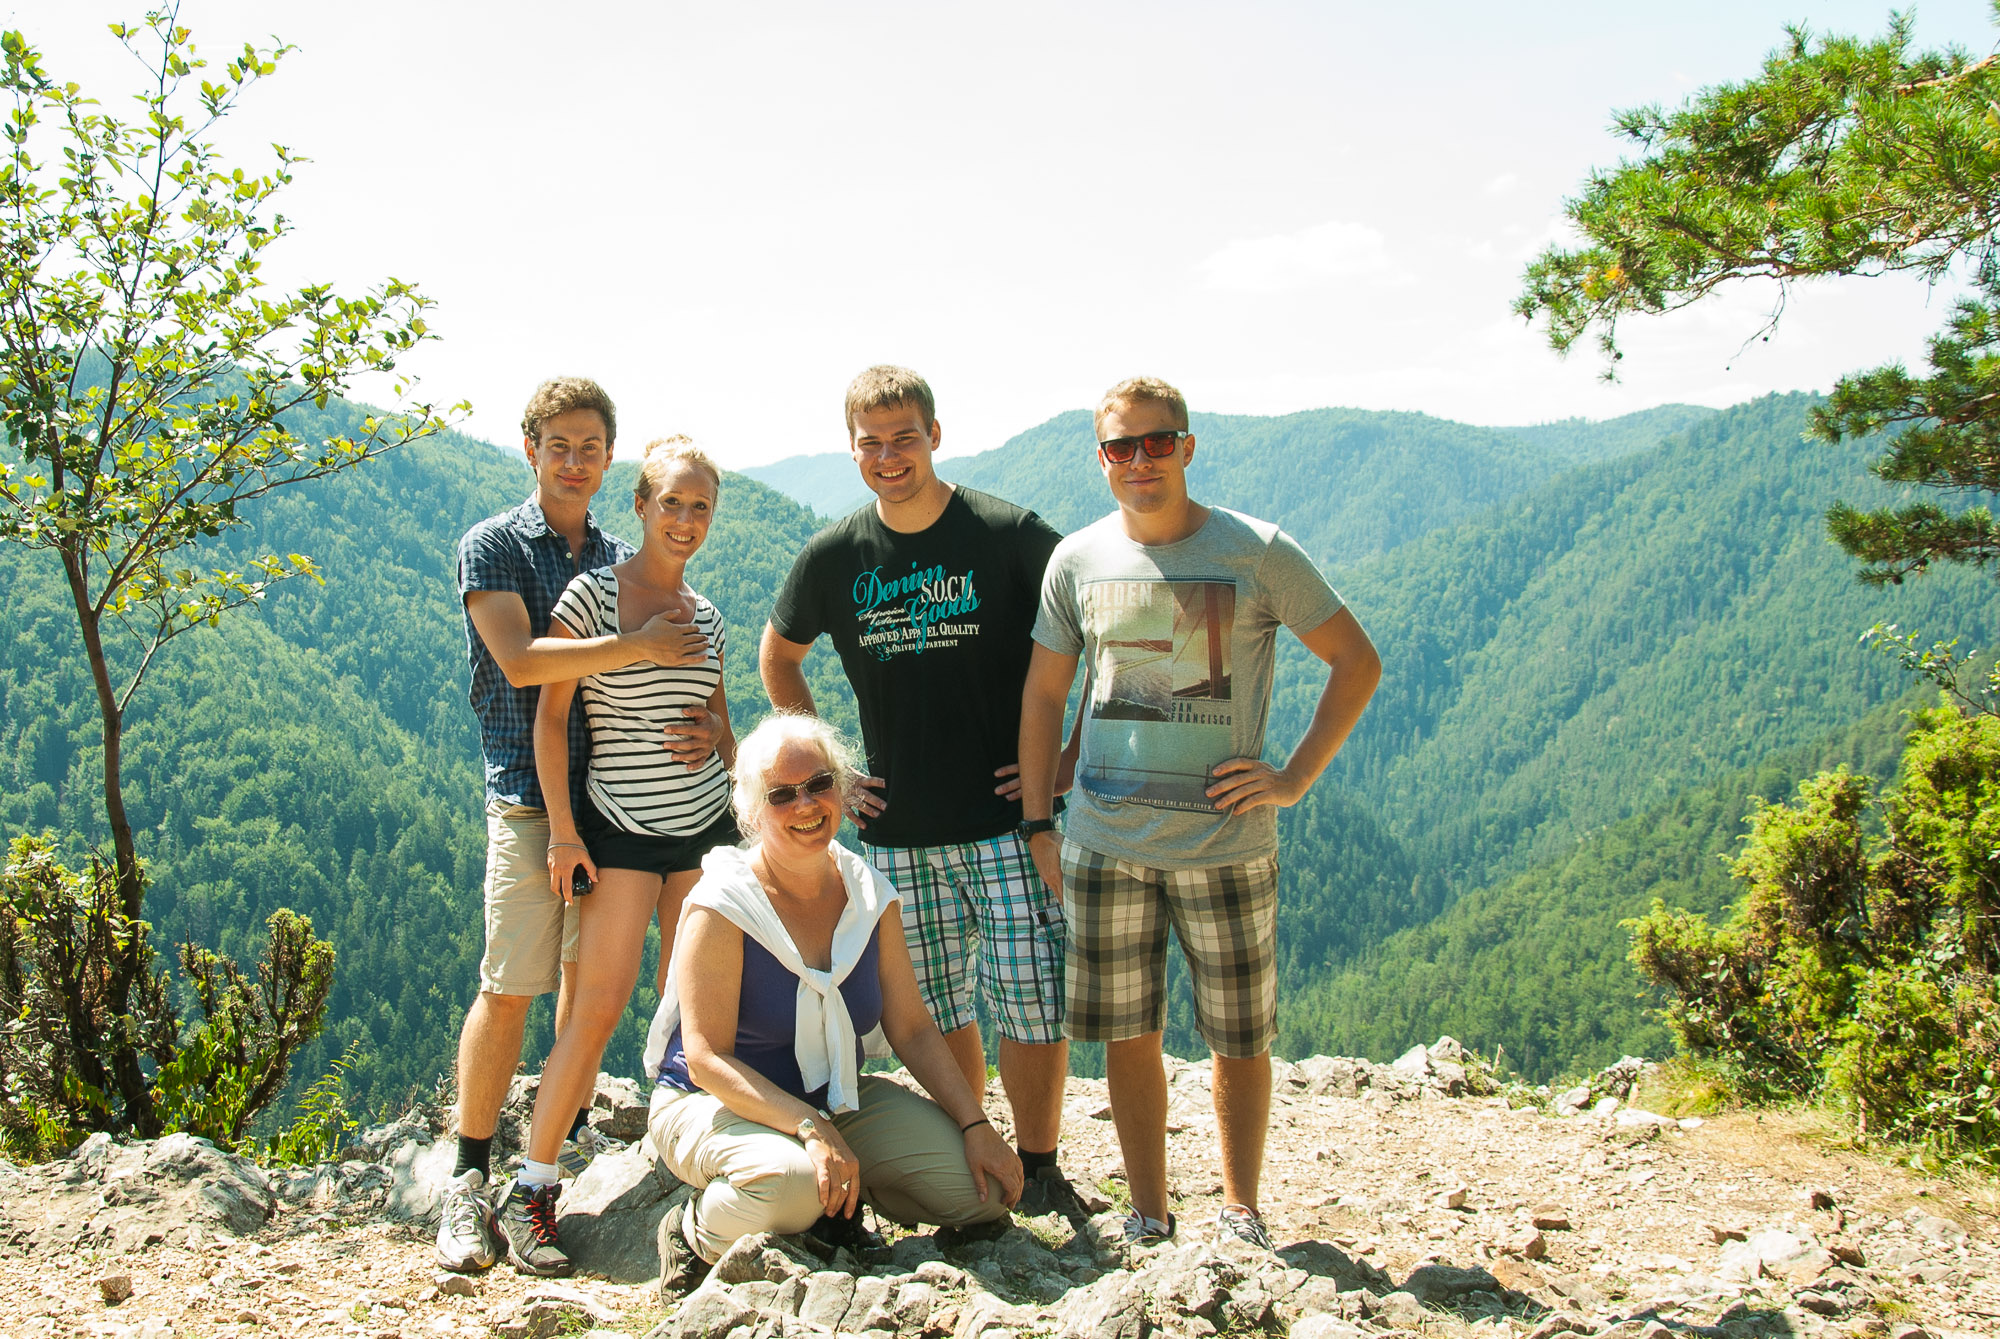 Our Group to Slovak Paradise